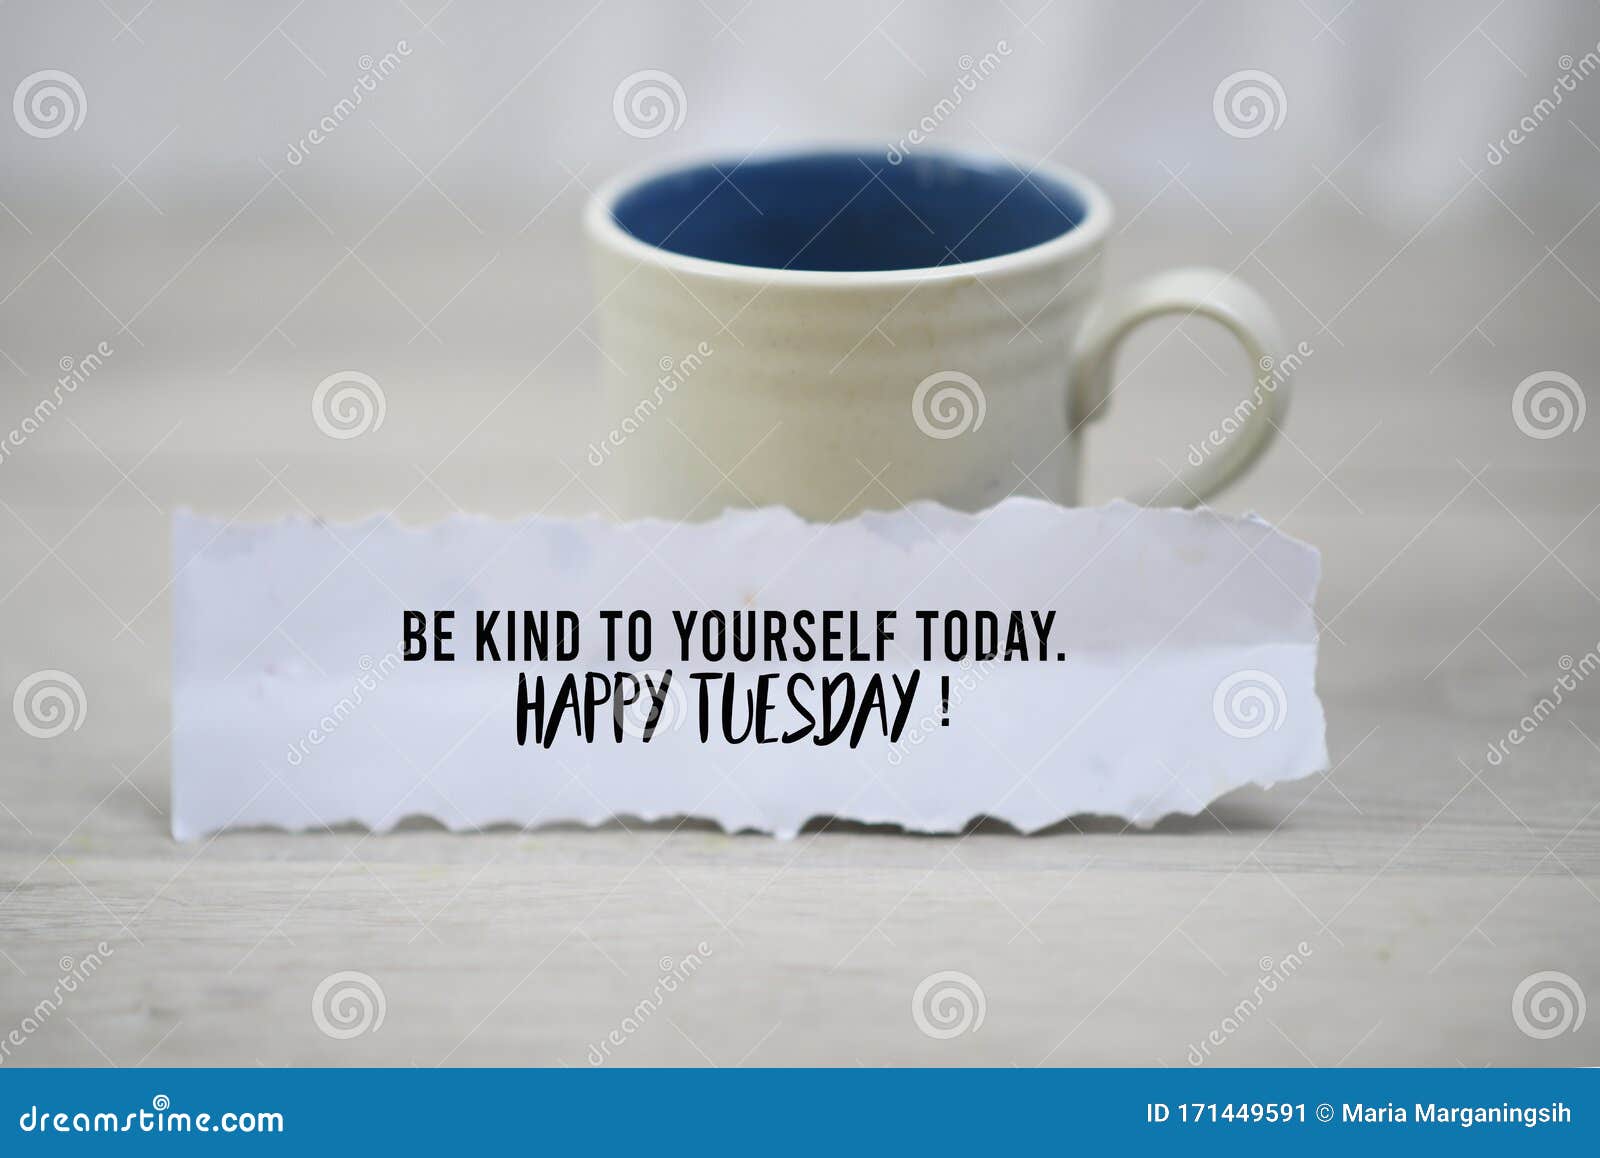 inspirational quote - be kind to yourself today. happy tuesday. with a cup of morning coffee and a white paper note concept.l